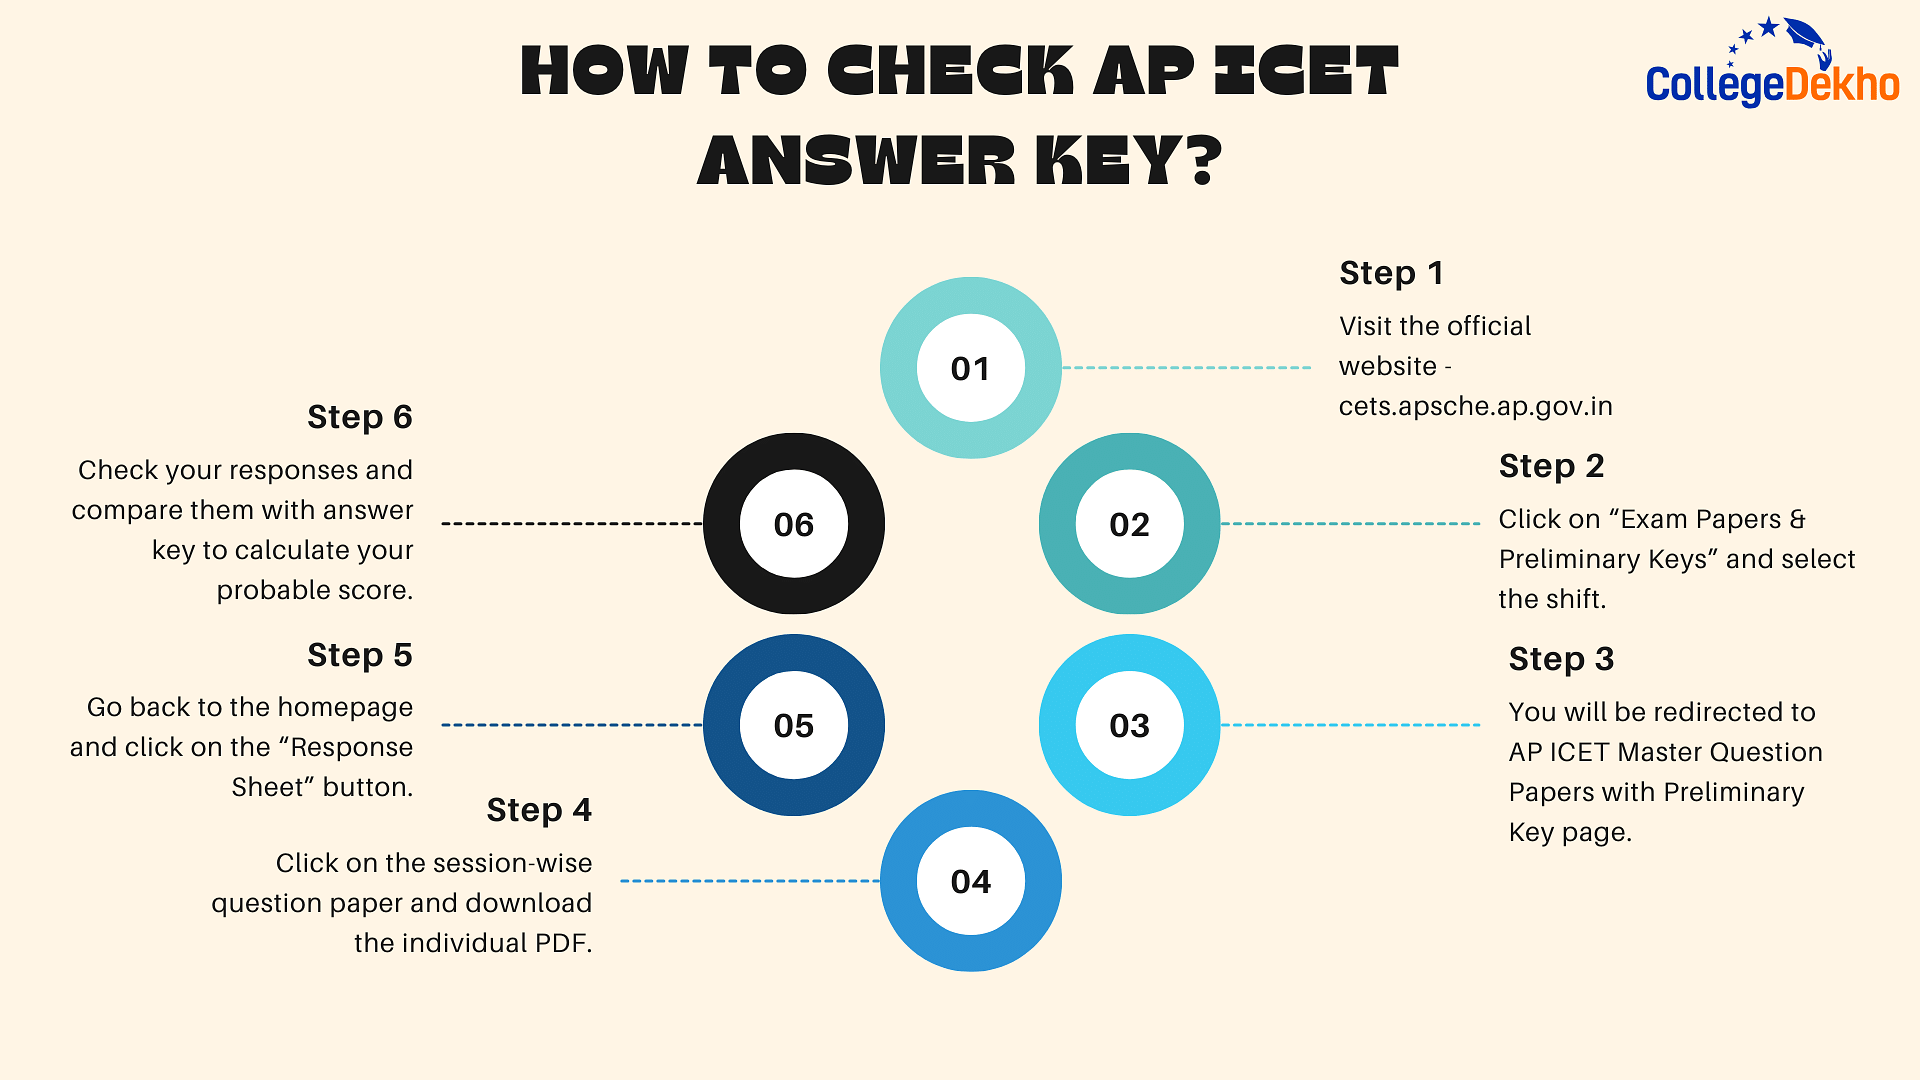 How to Check AP ICET Answer Key?